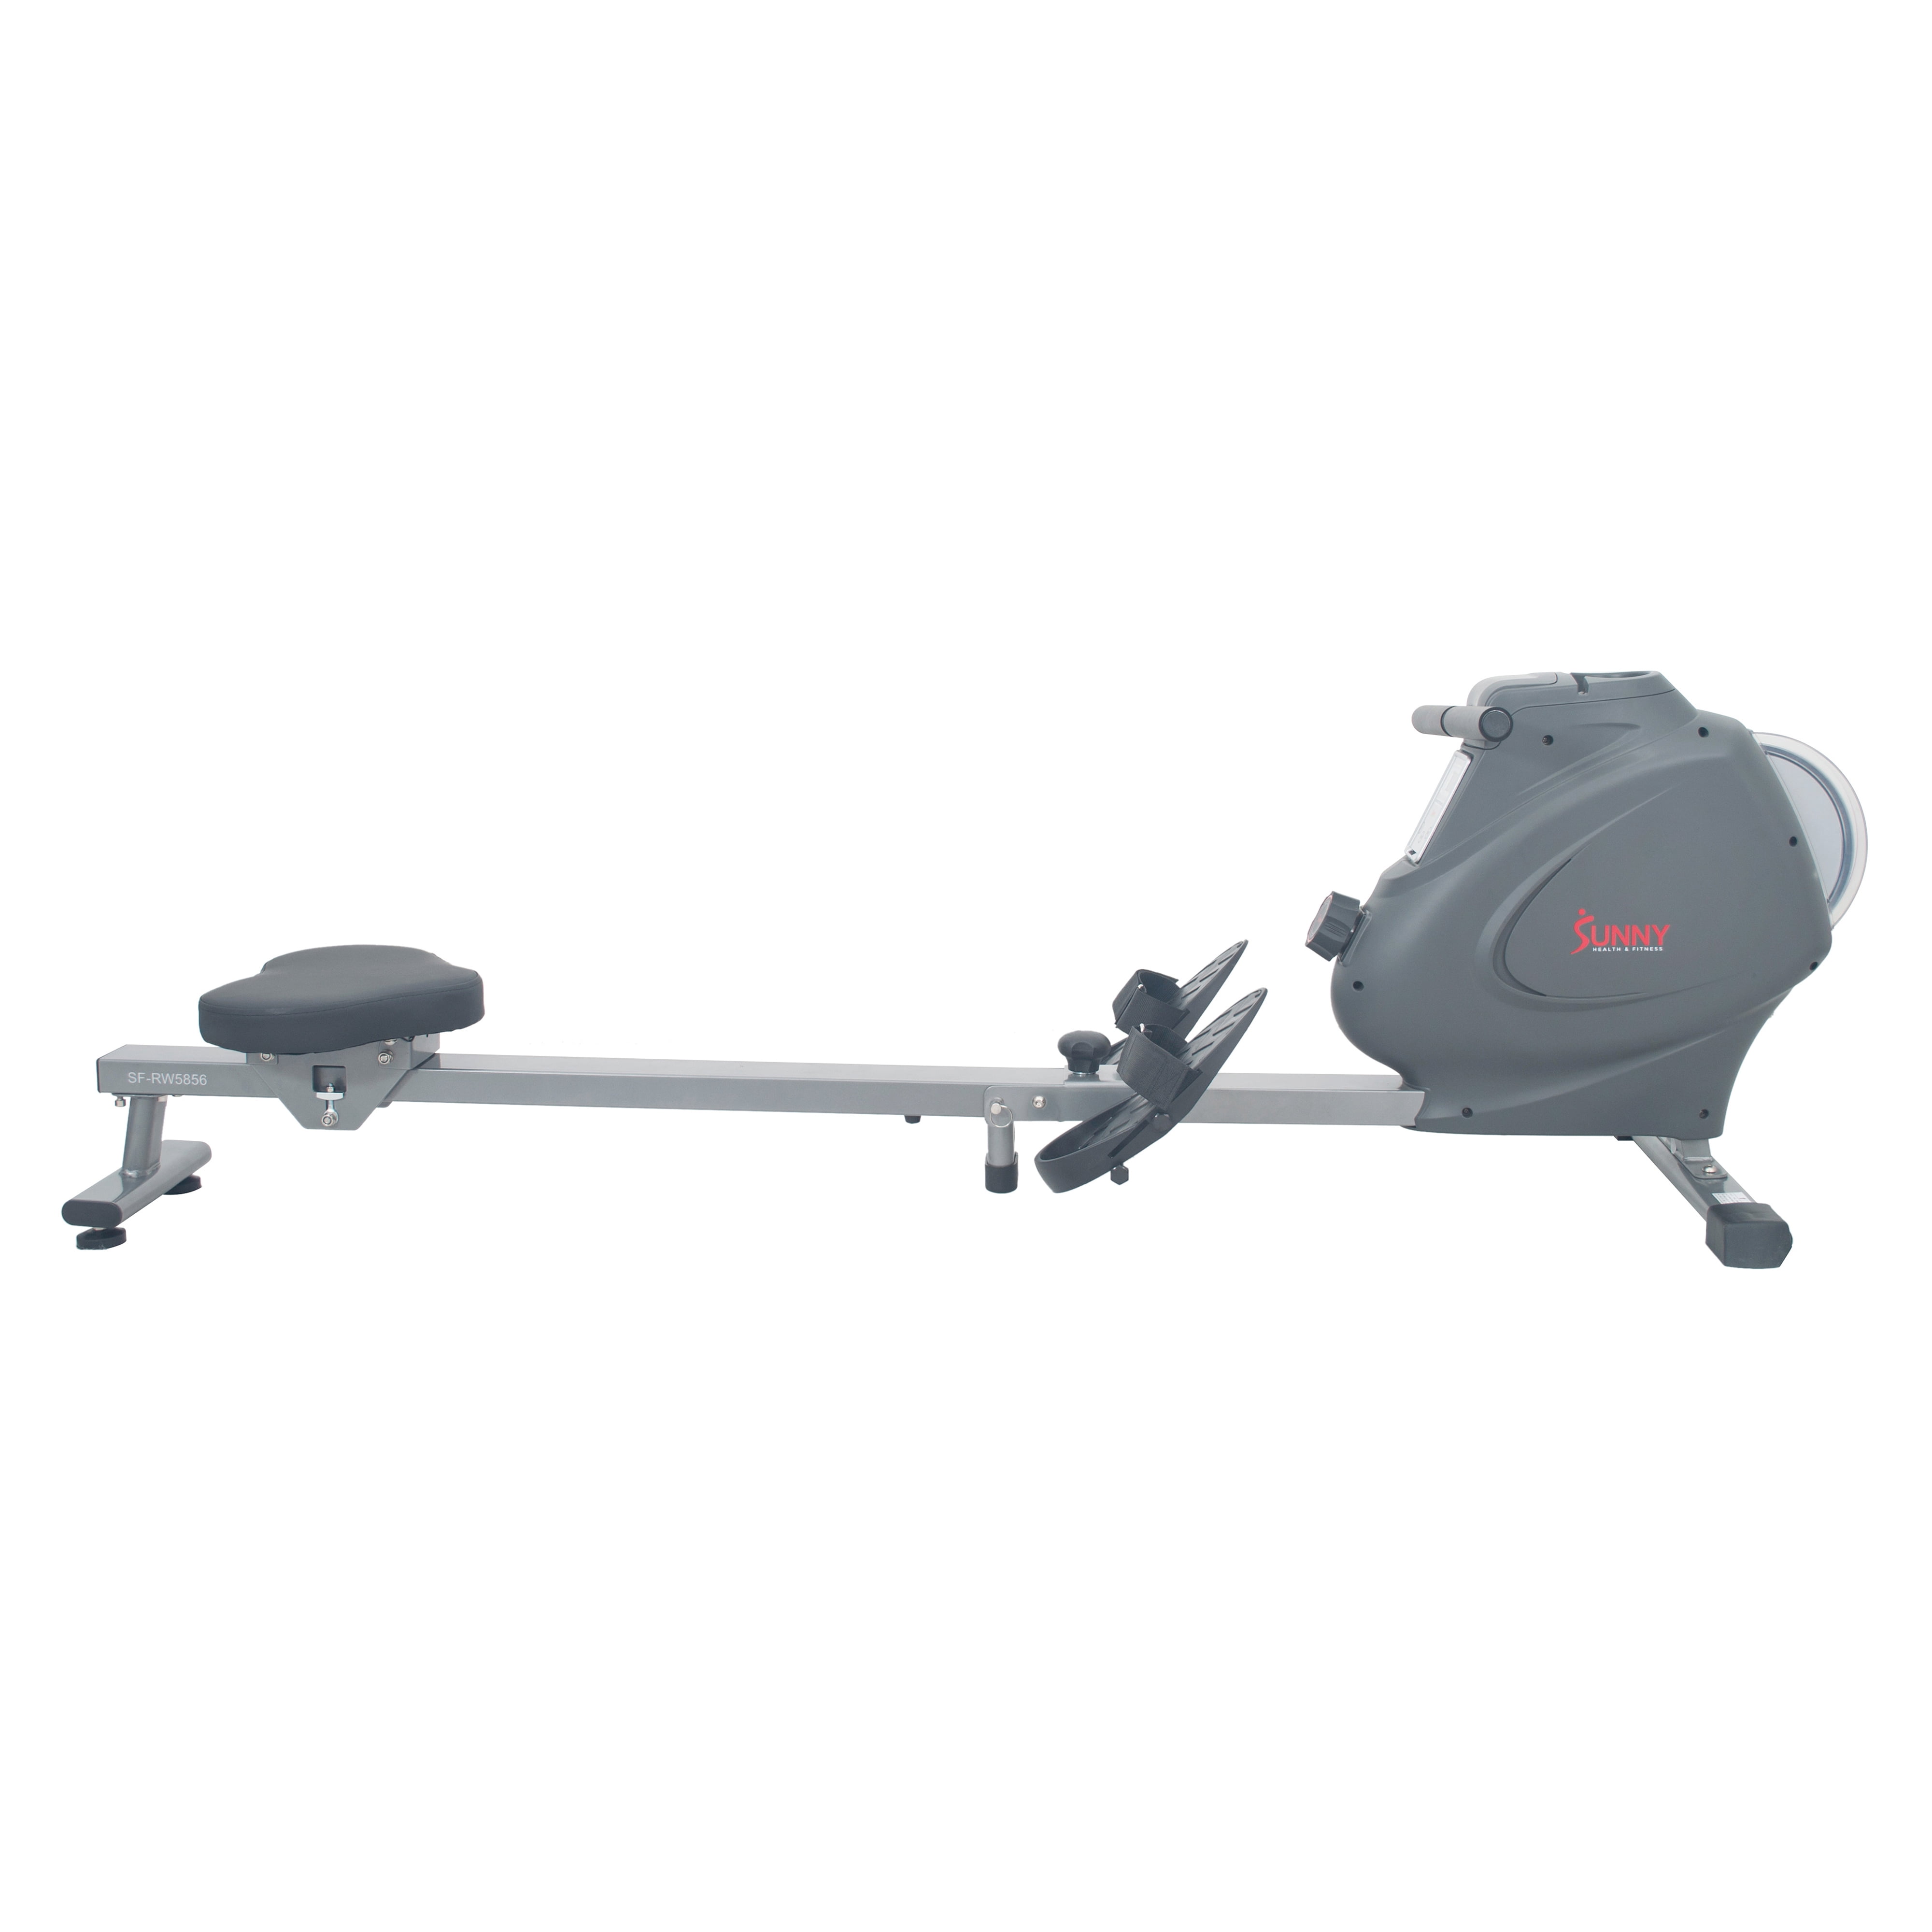 Bottle Holder 285 LB Max Weight 43 Inch Slide Rail Sunny Health & Fitness Compact Folding Magnetic Rowing Machine with LCD Monitor Silver Synergy Power Motion SF-RW5801 